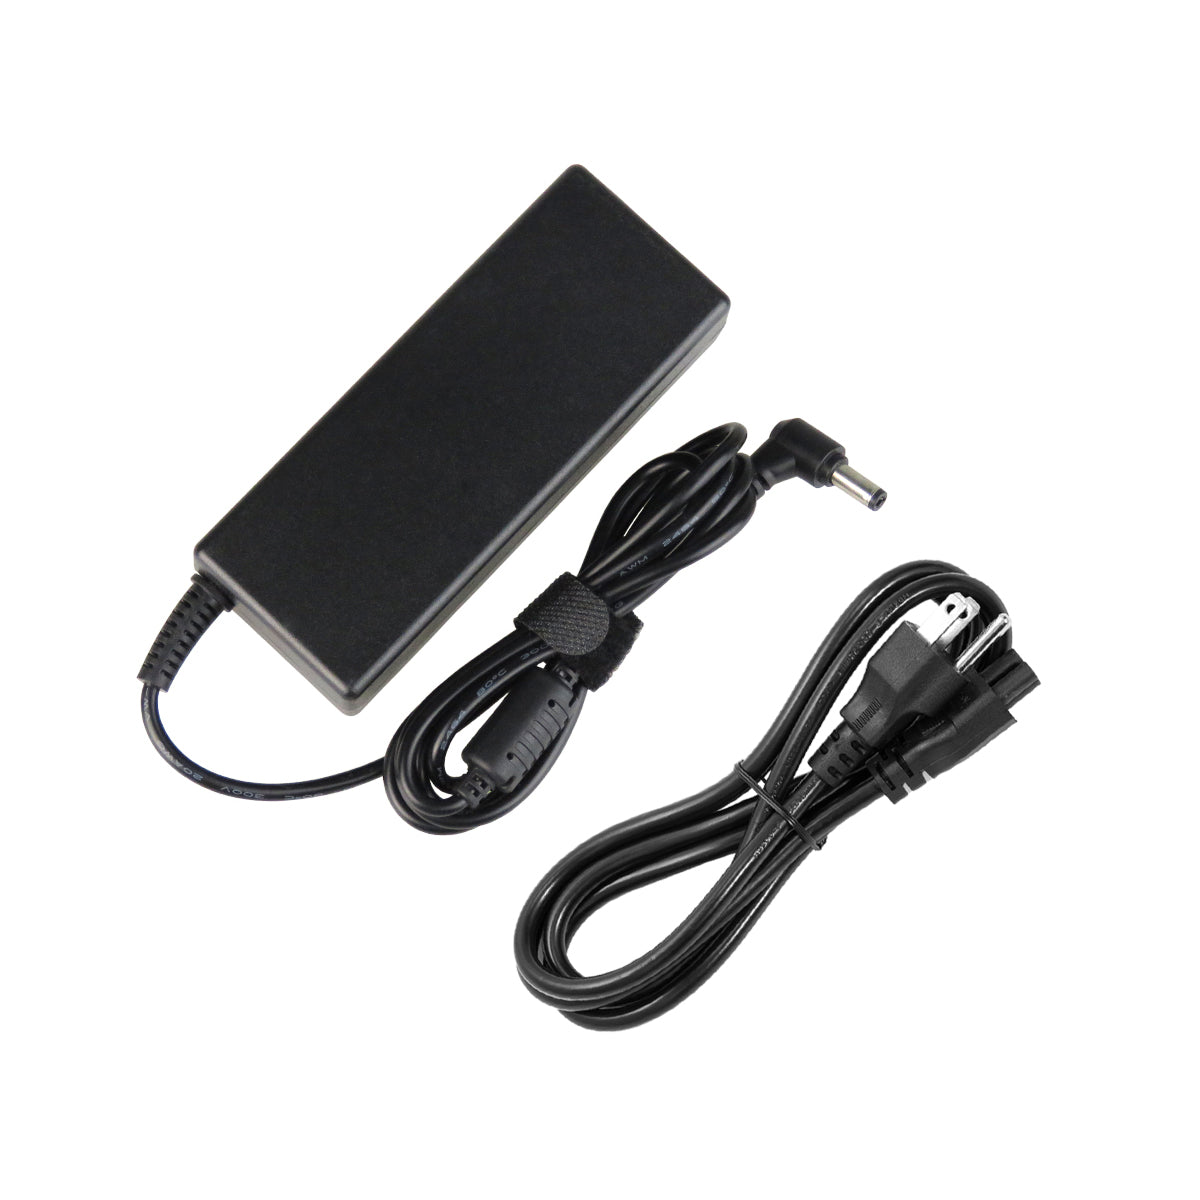 AC Adapter Charger for ASUS X58LE Notebook.